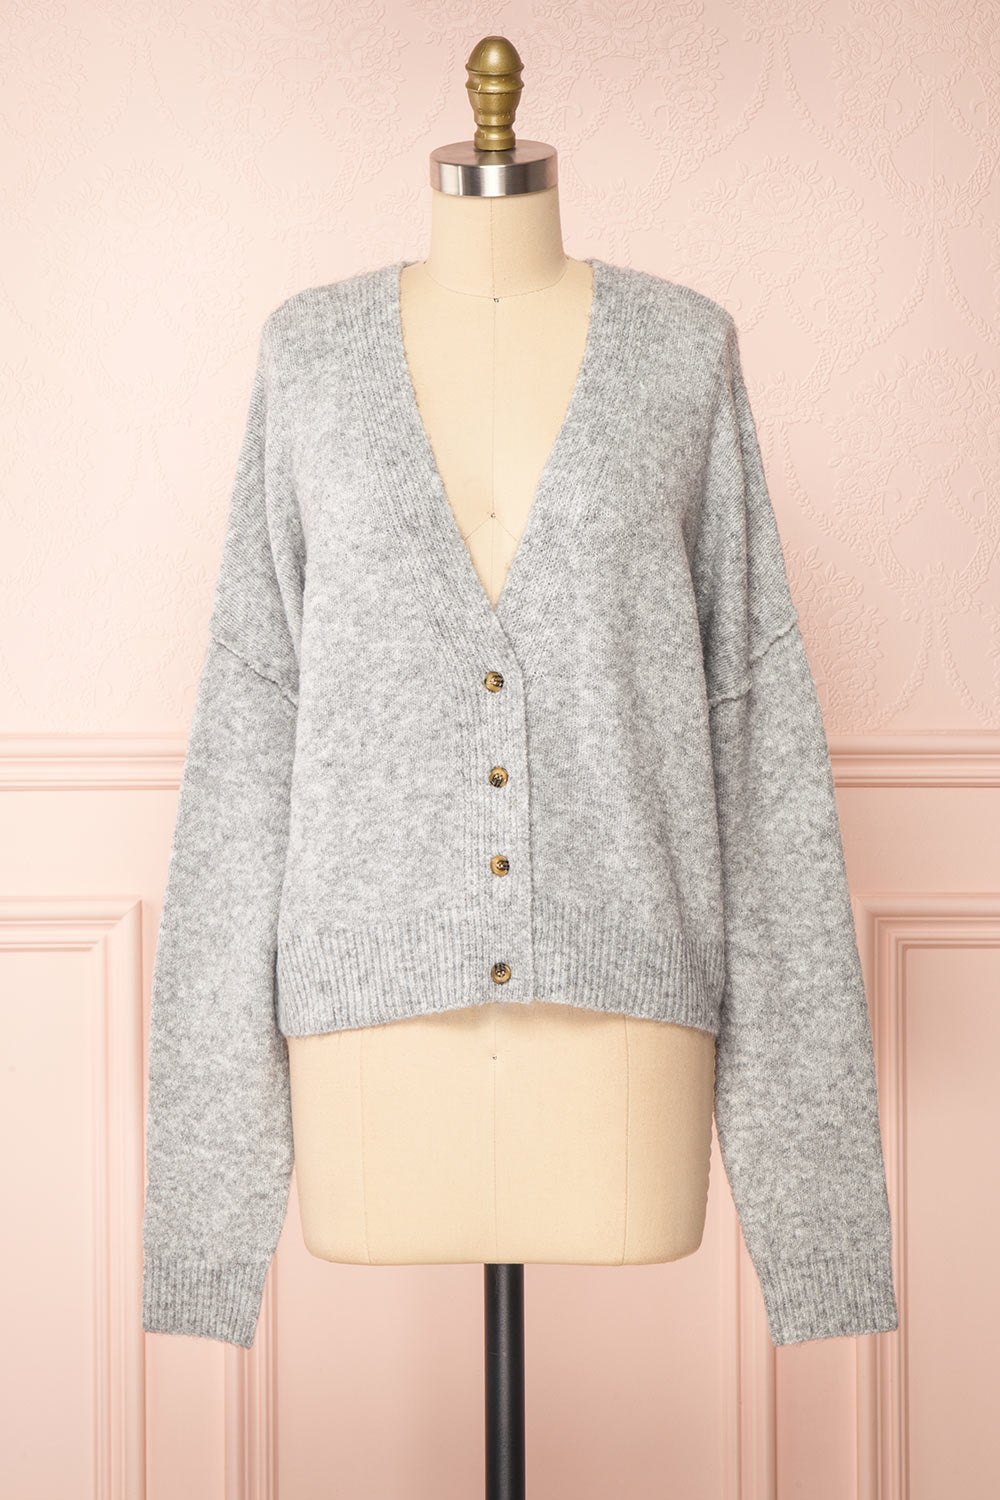 Vikep Grey Knitted Button-Up Cardigan | Boutique 1861 front view 